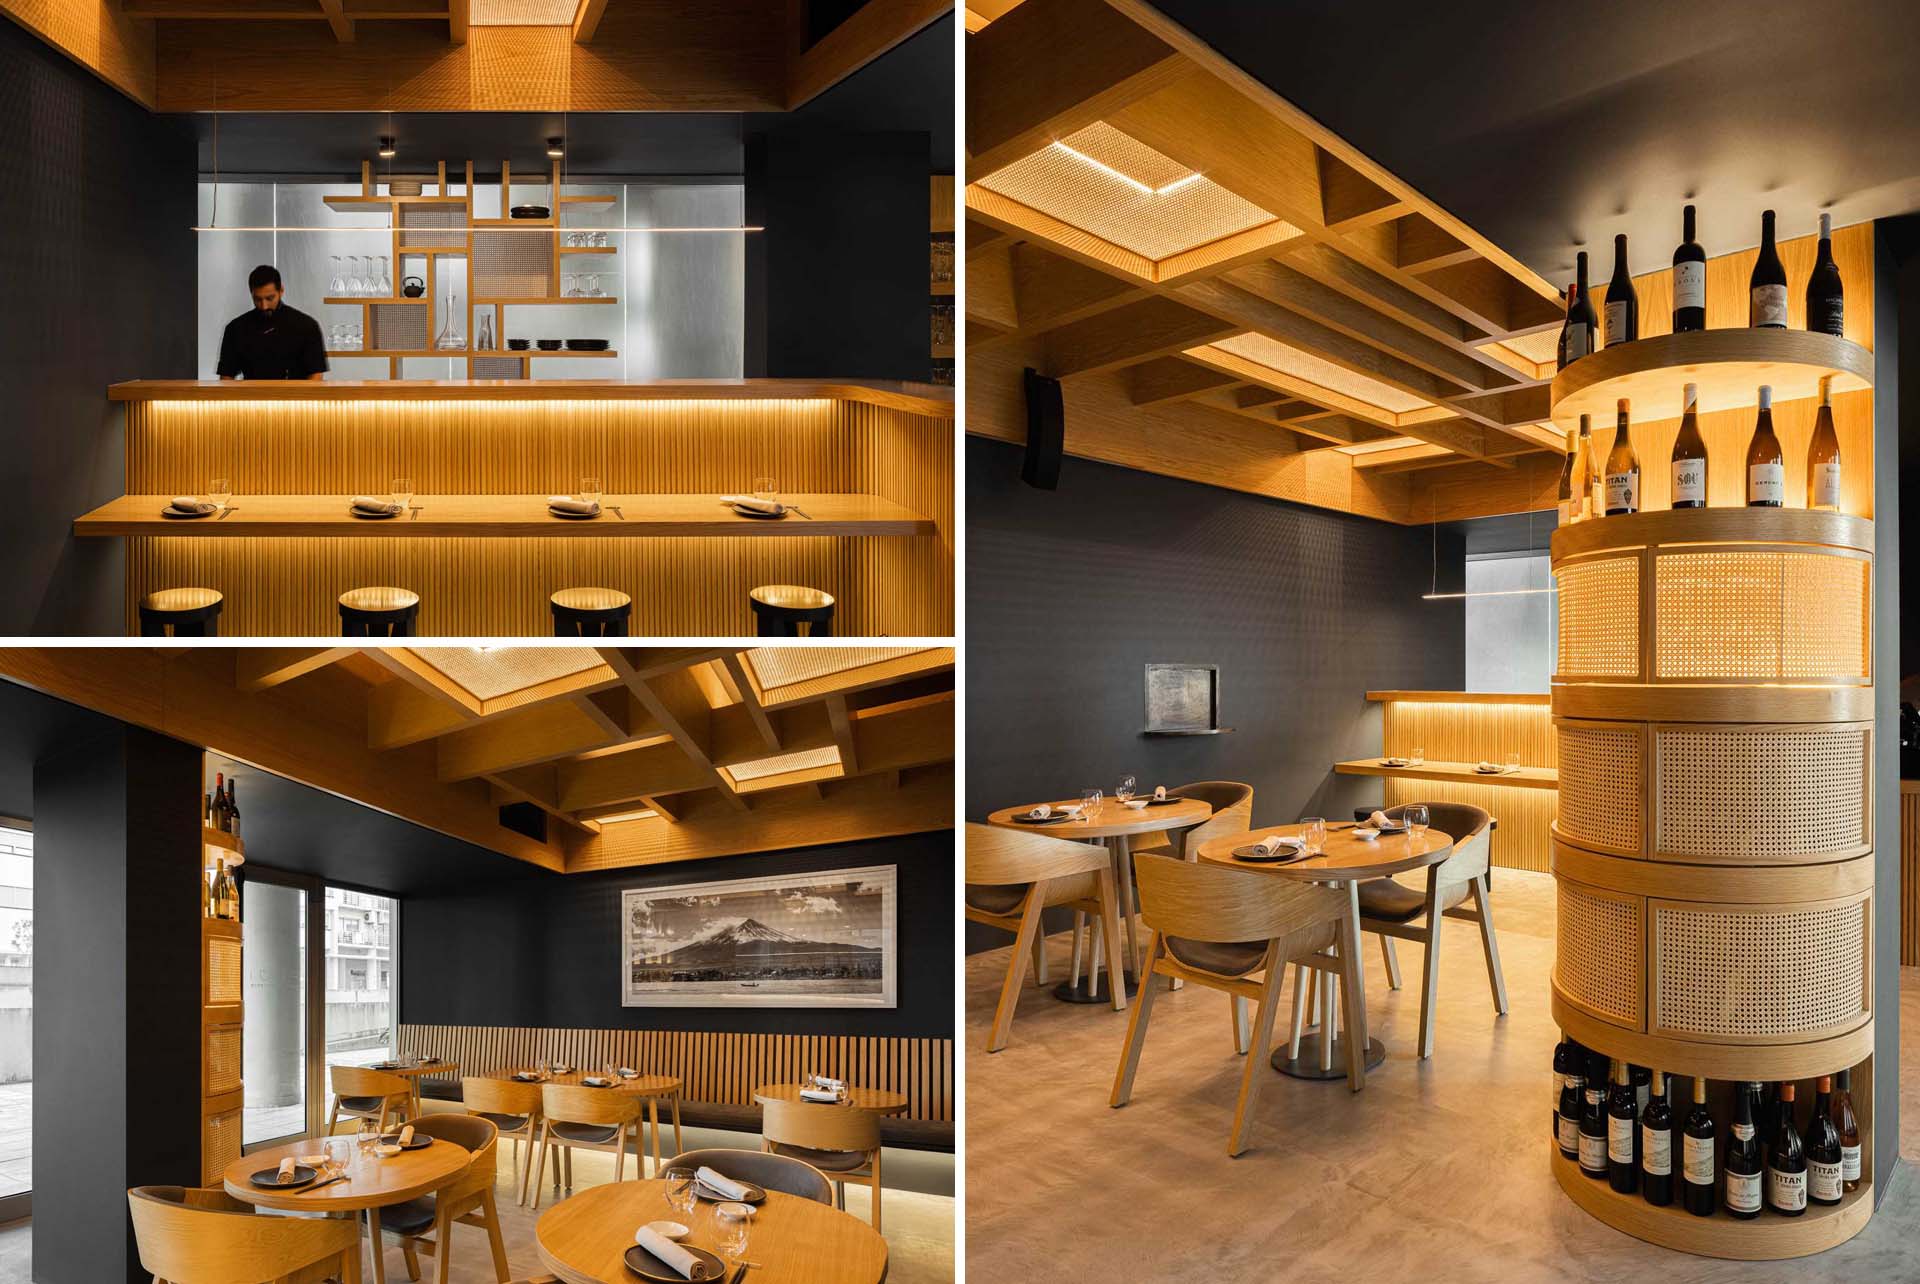 A modern restaurant interior with dark gray walls, wood accents, straw panels, and hidden LED lighting.